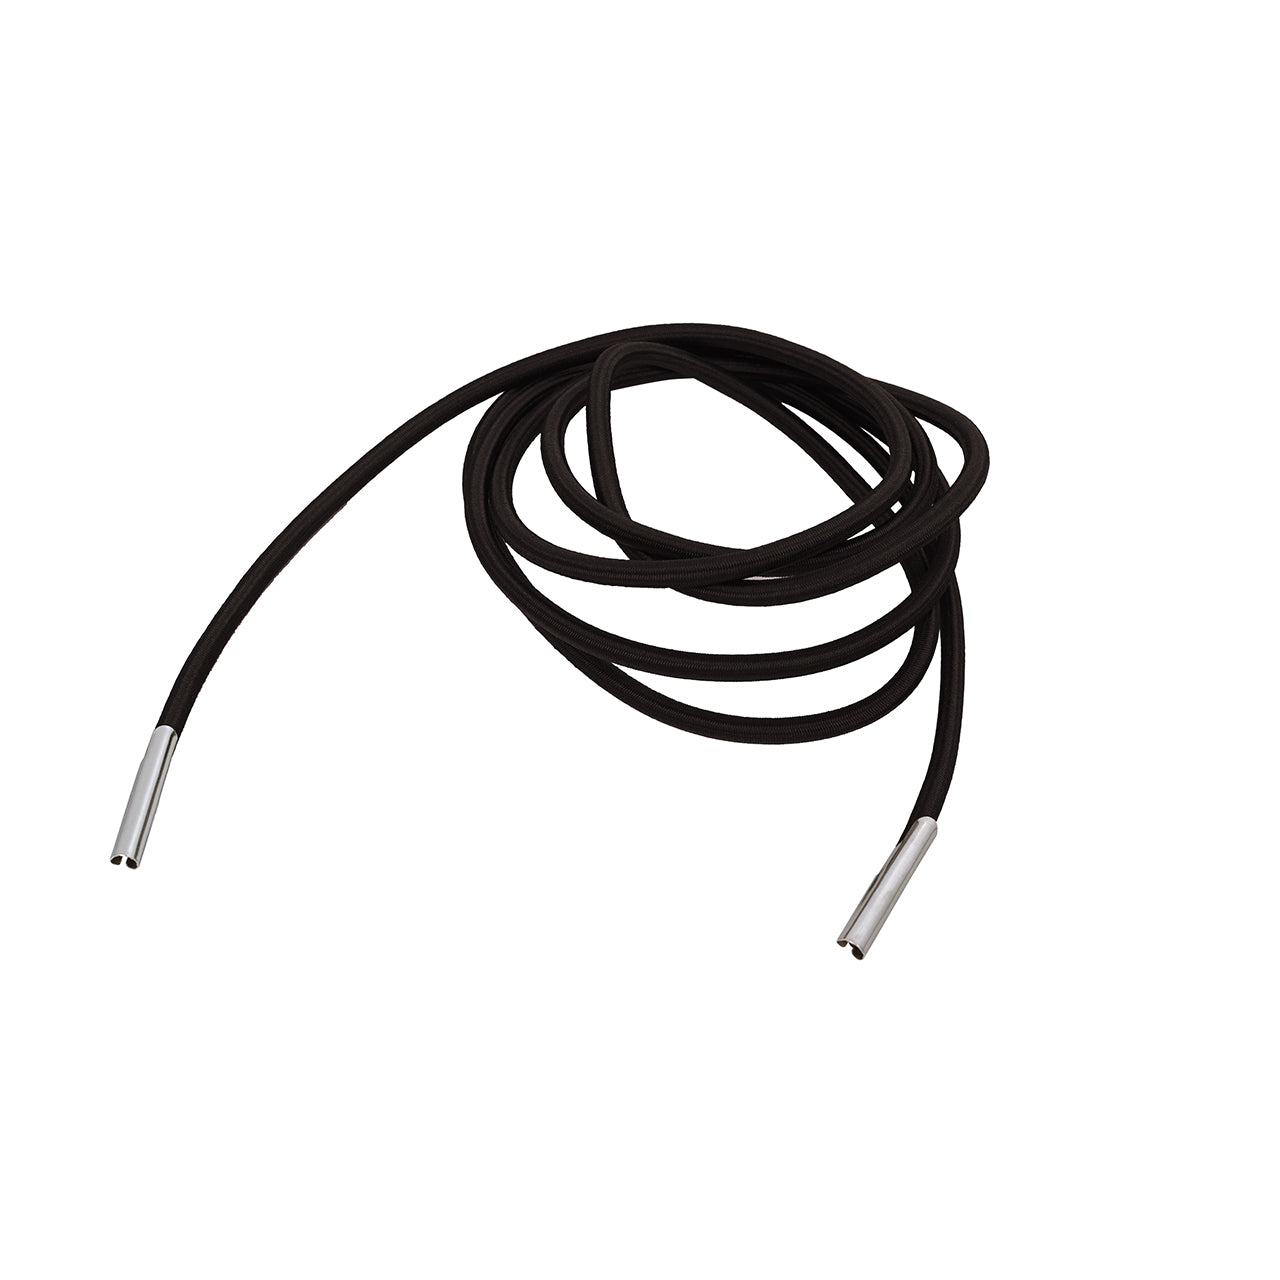 Single Replacement Bungee Cord Kit for Zero Gravity Chairs in the black variation.